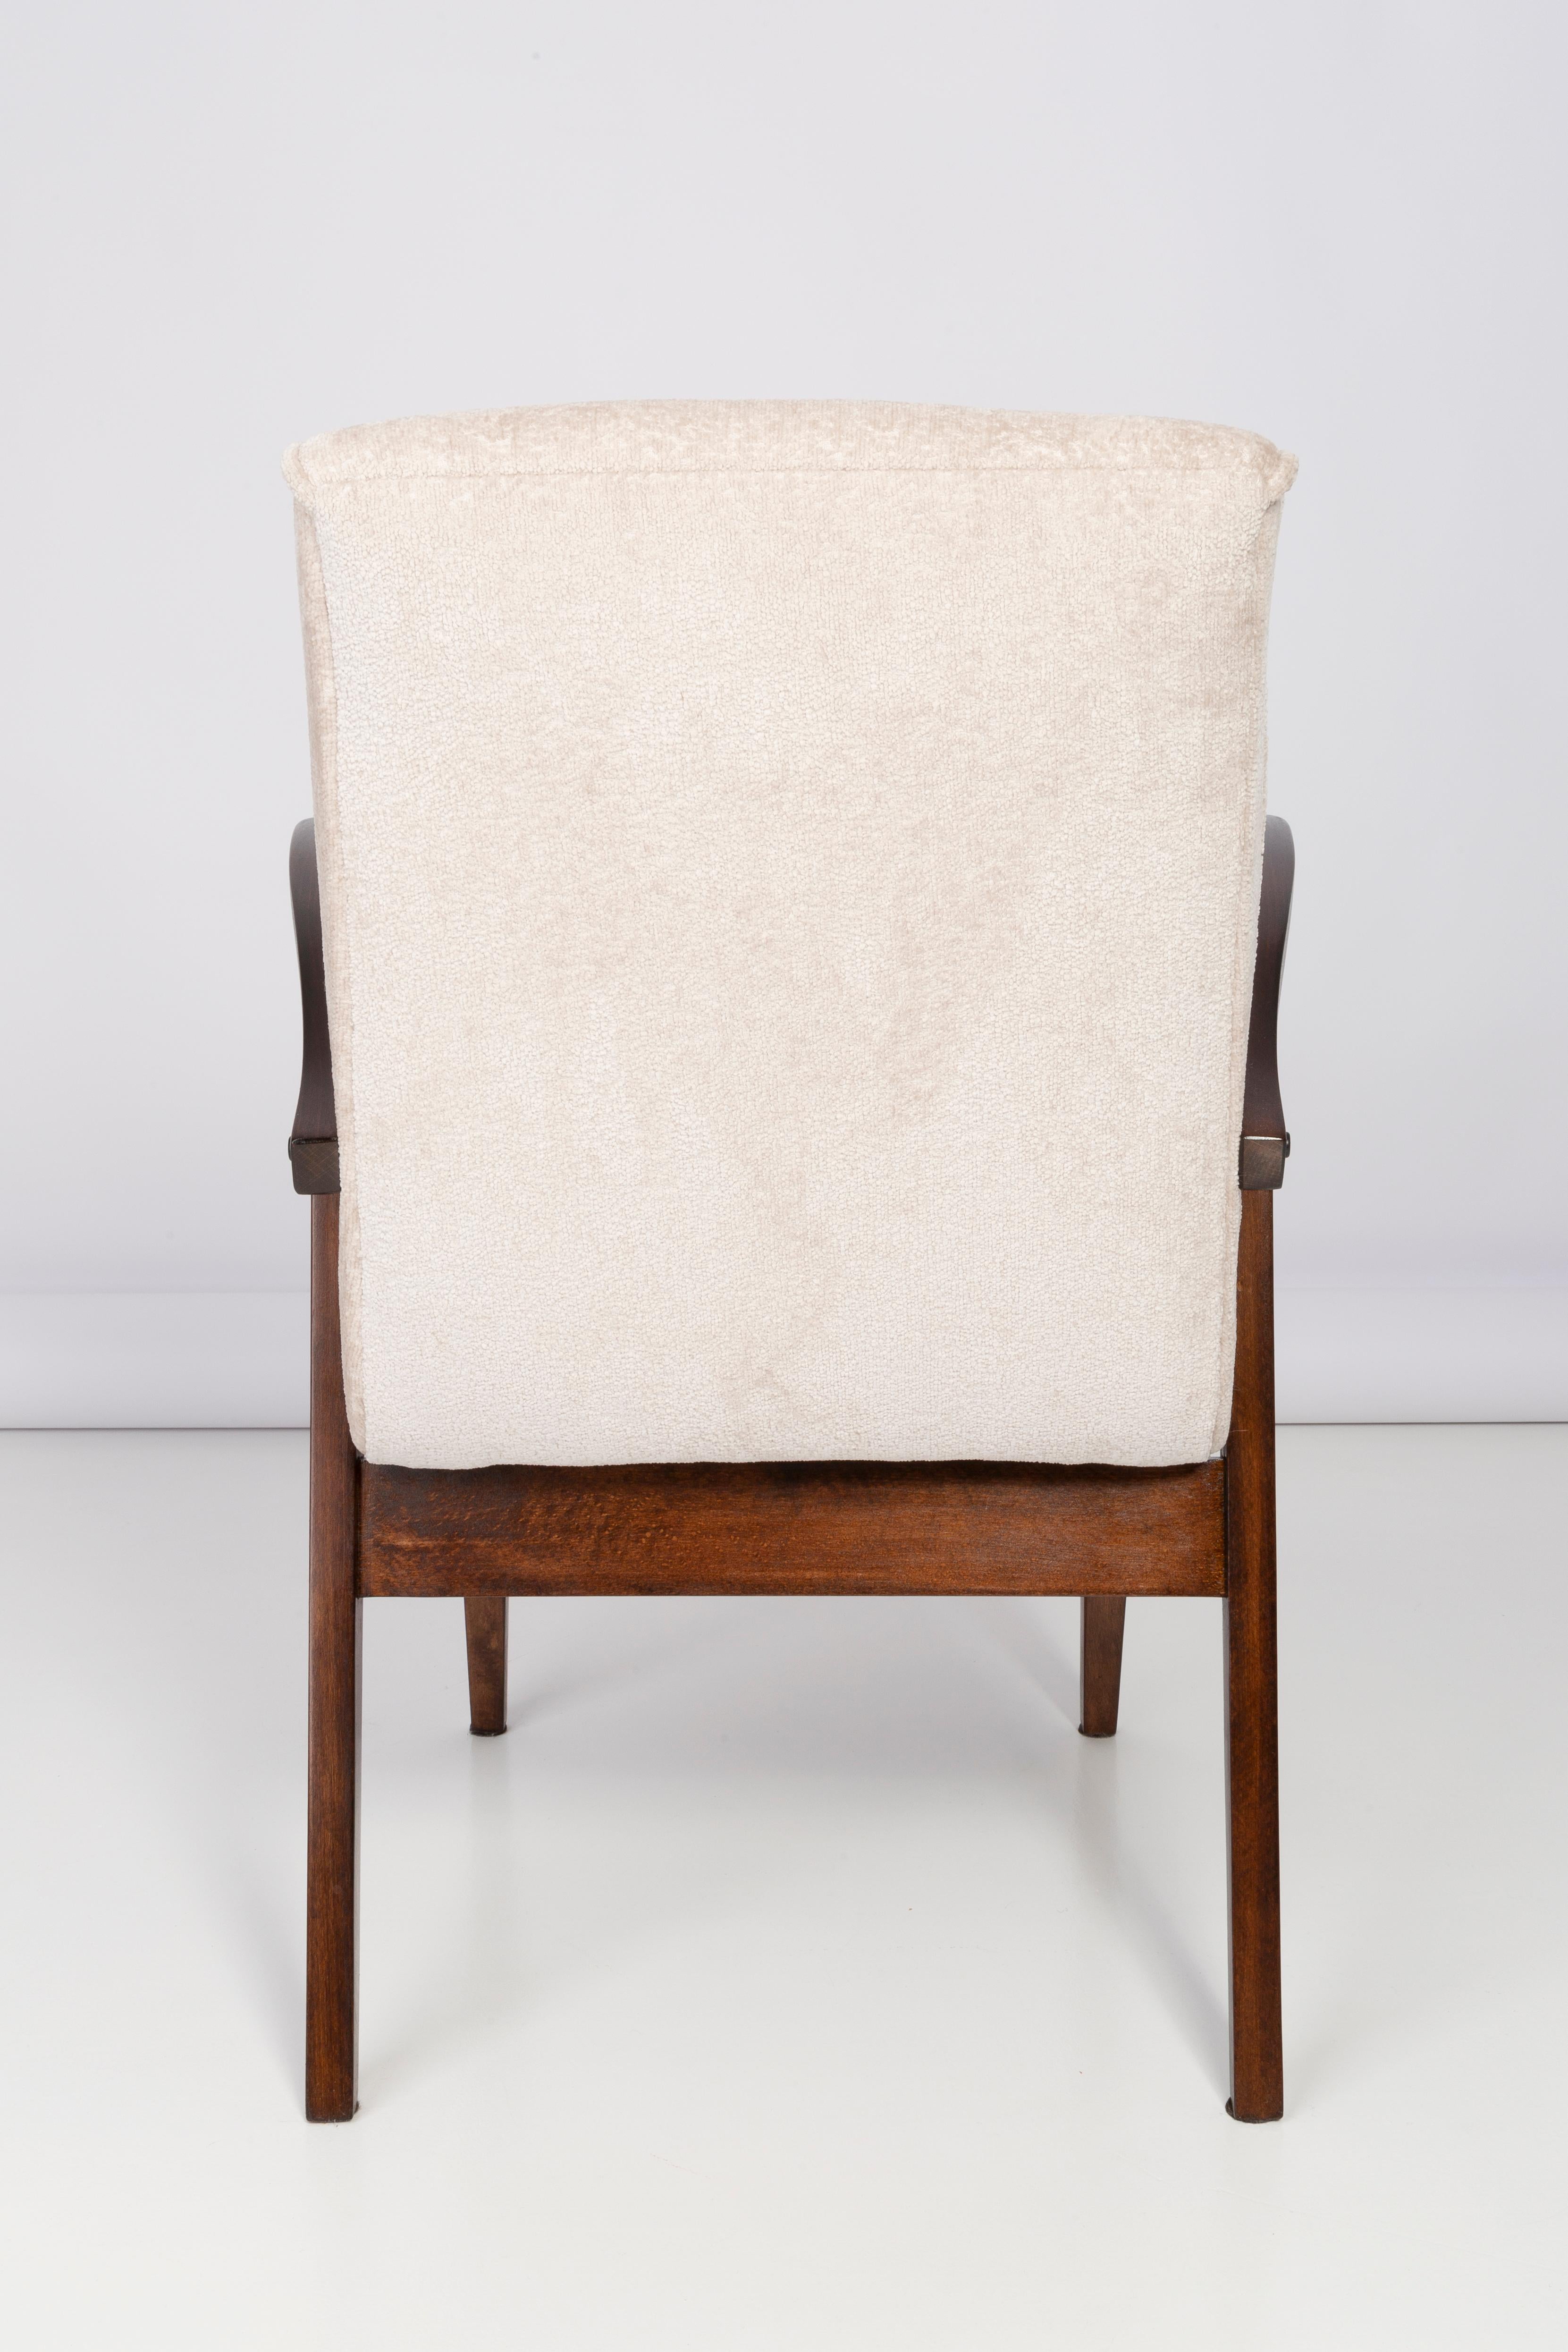 Hand-Crafted 20th Century Vintage Light Cream Armchair by Mieczyslaw Puchala, 1960s For Sale